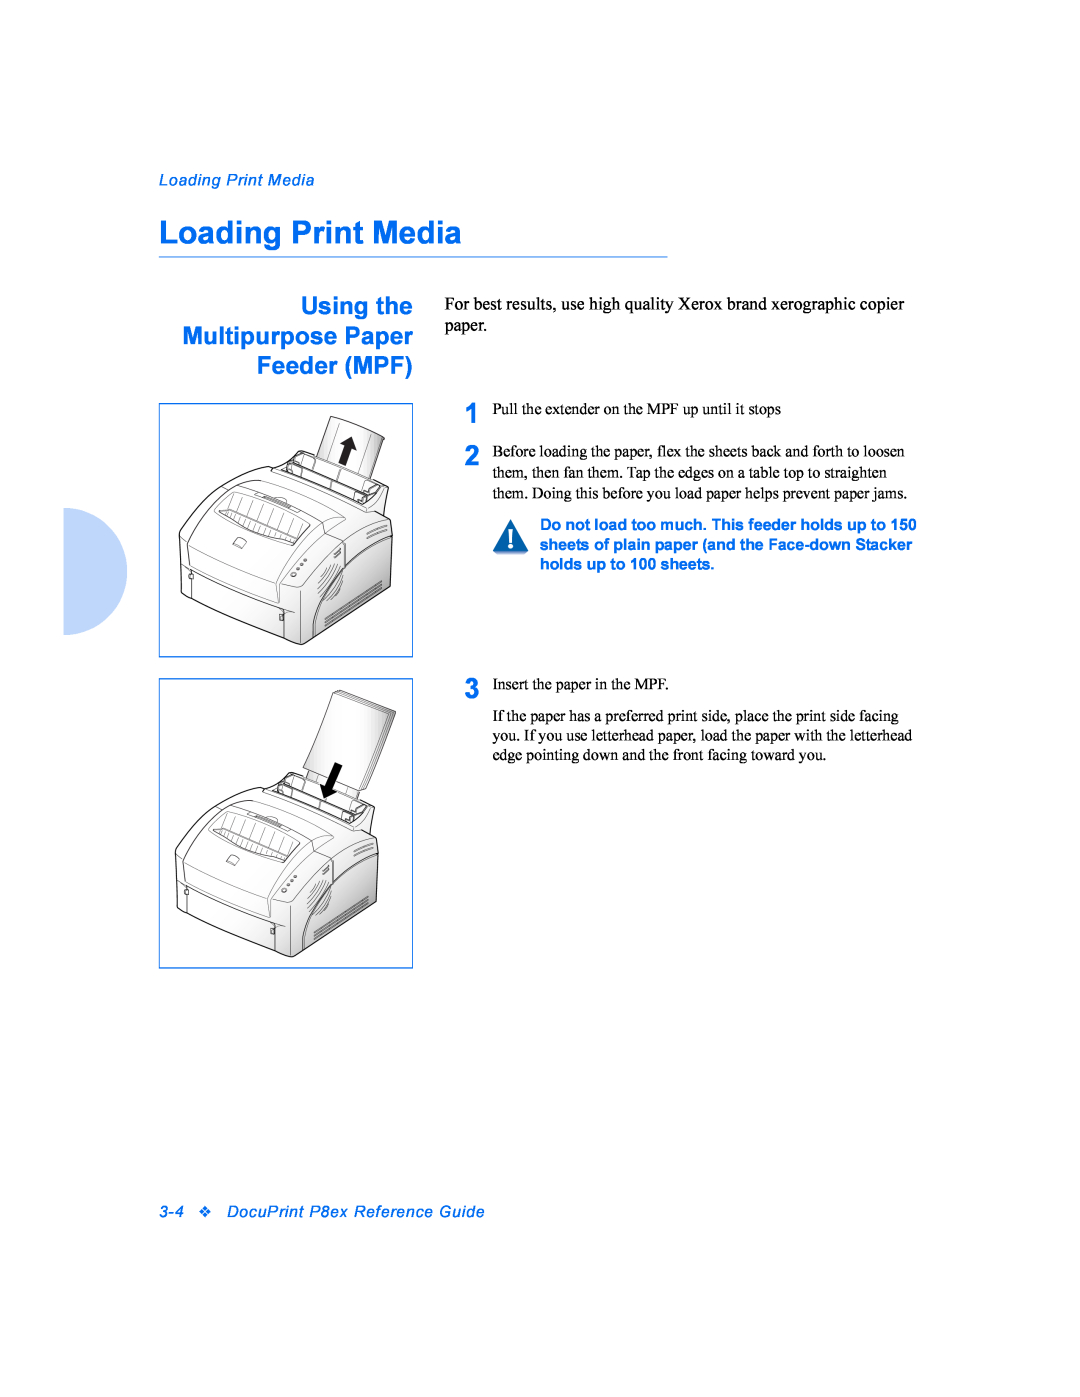 Xerox manual Loading Print Media, Using the Multipurpose Paper Feeder MPF, 3-4DocuPrint P8ex Reference Guide 